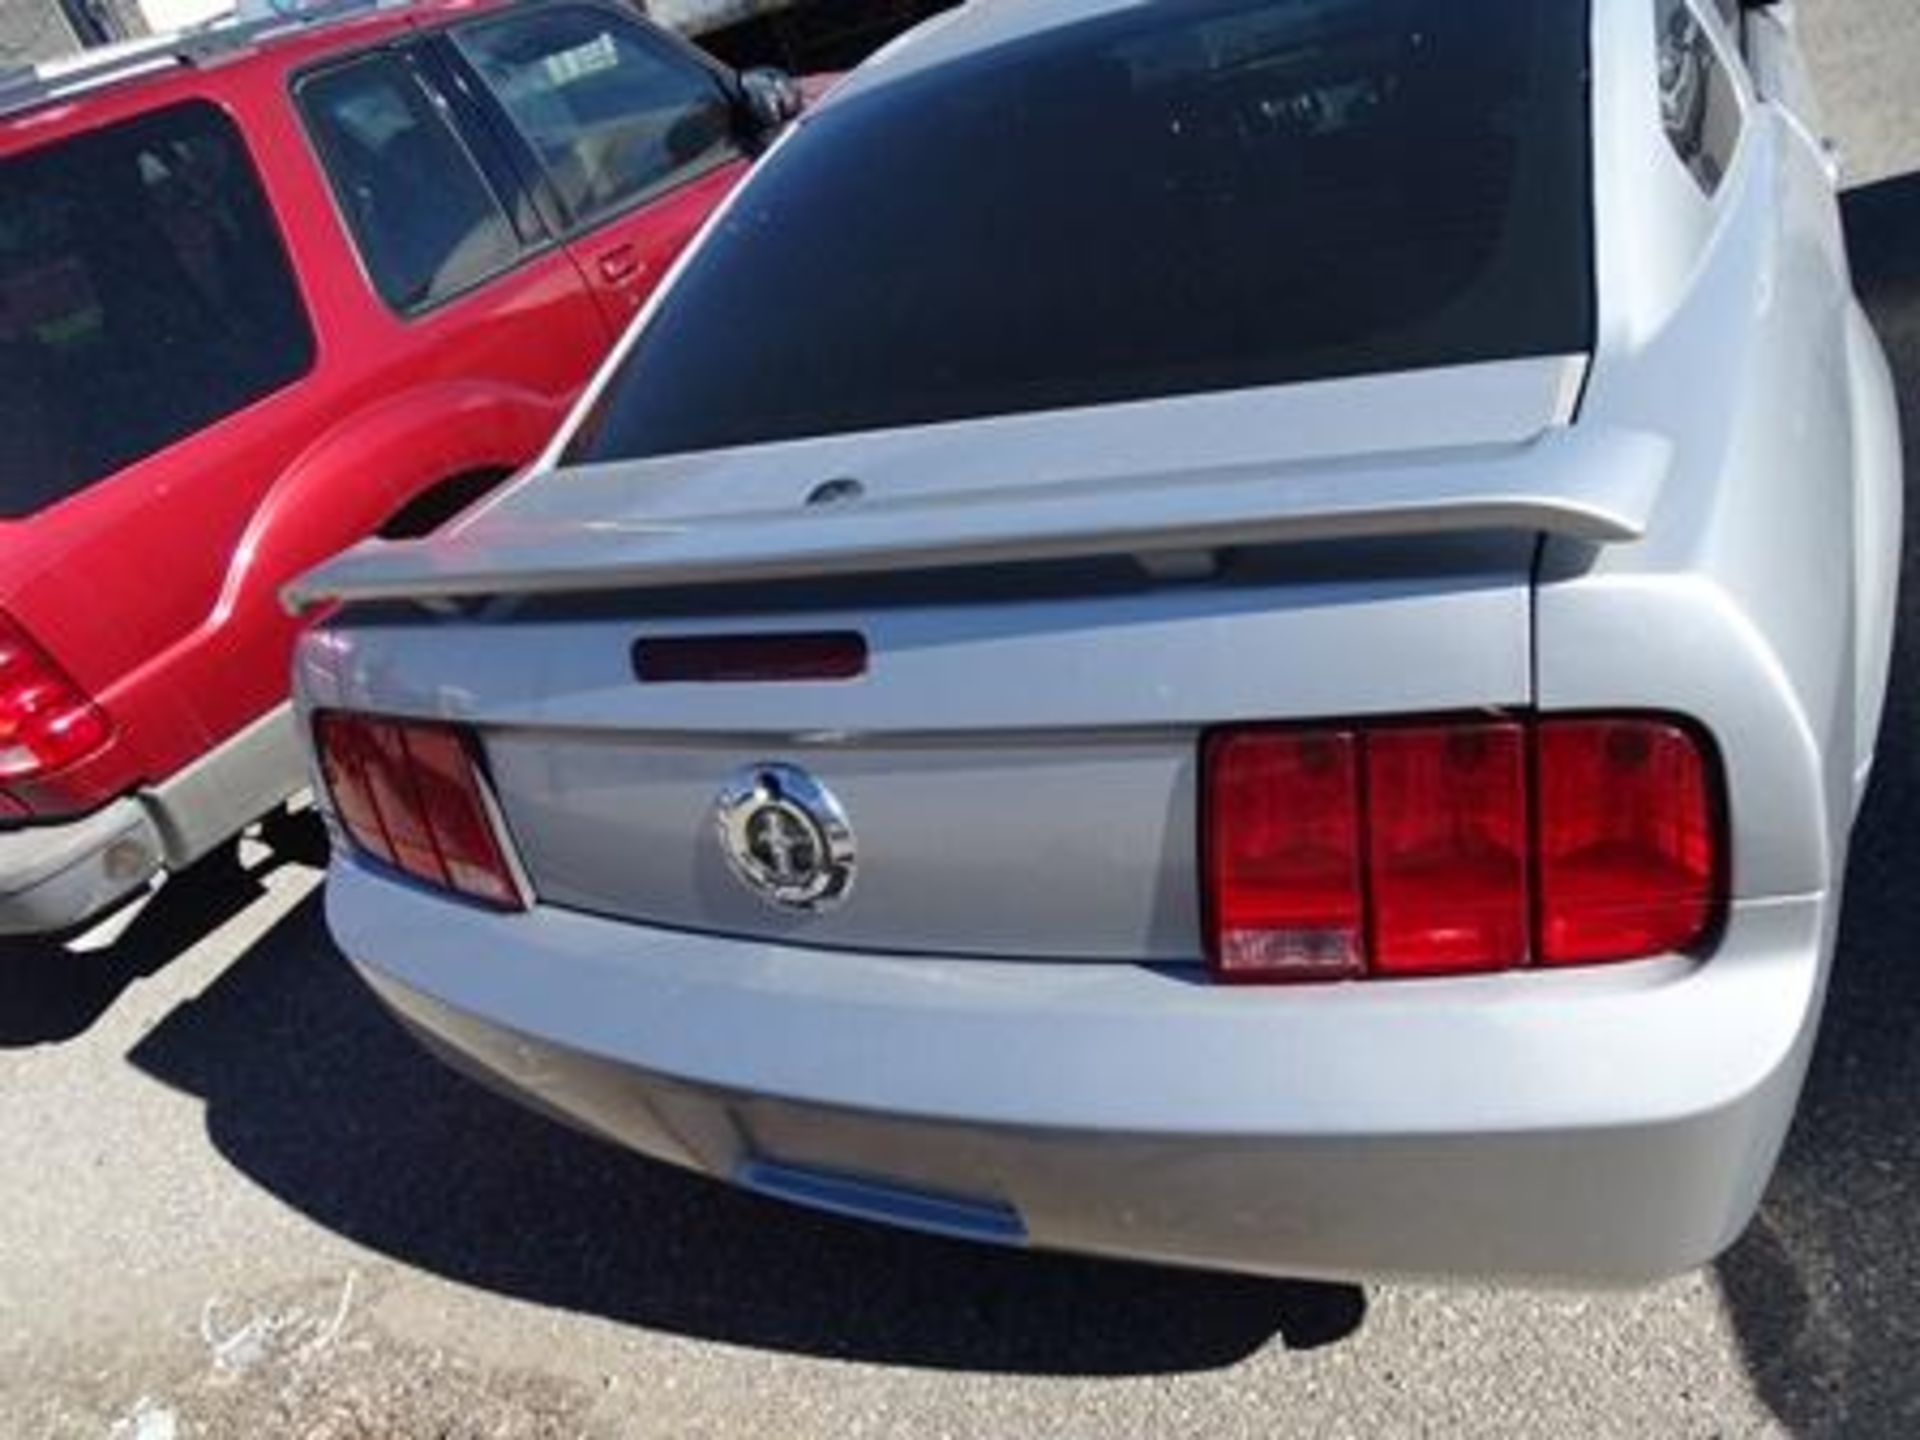 Vehículo Marca Ford Mustang, Tipo Sedan, Modelo 2007, Located In: Chihuahua, Deposit Of: $5000 - Image 5 of 17